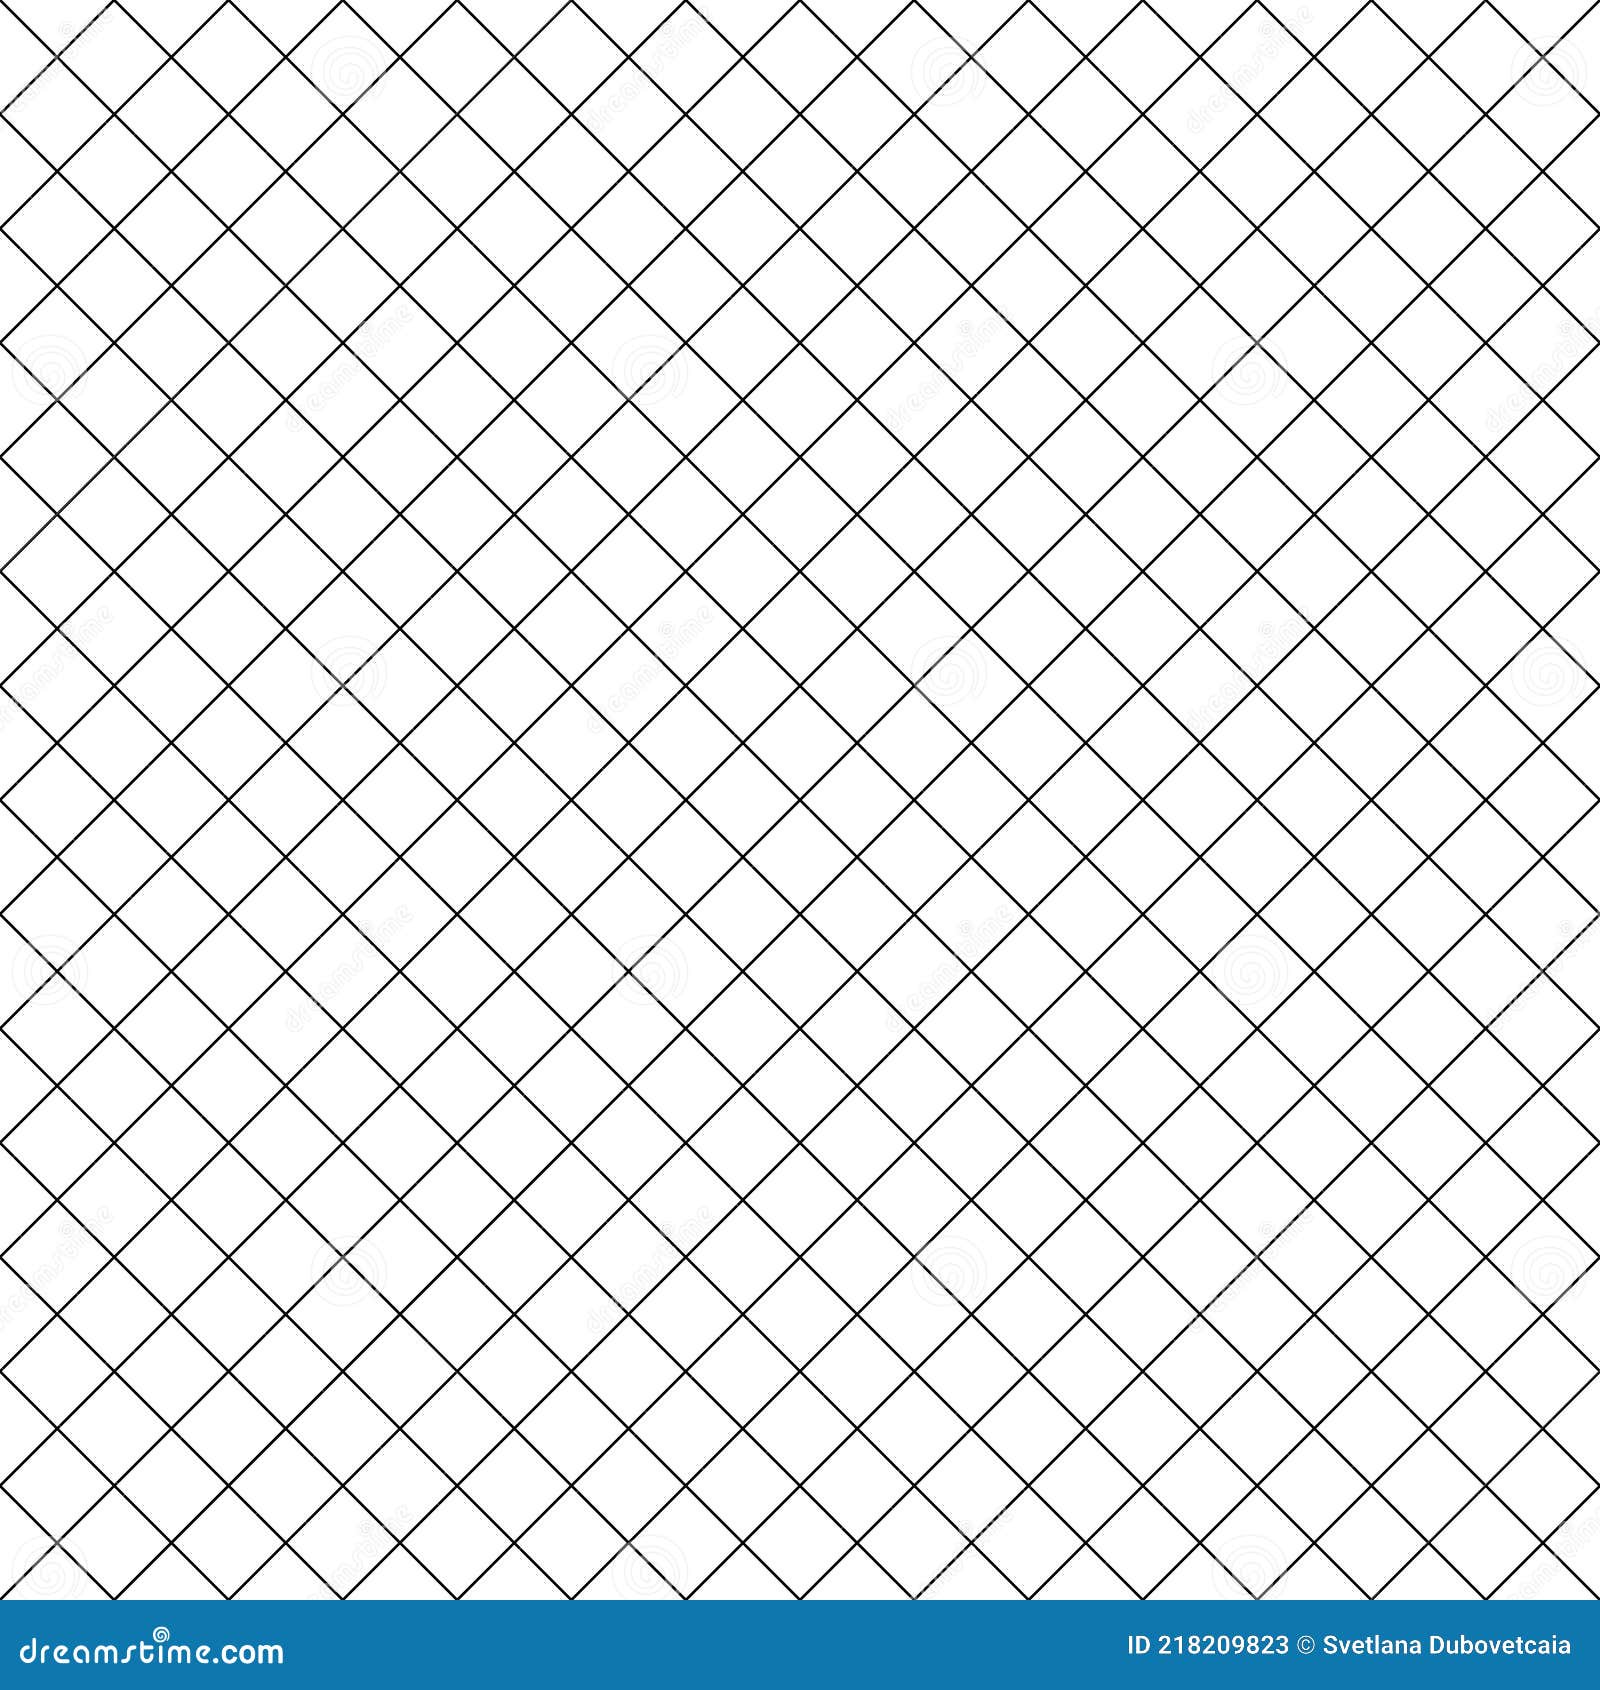 cross grid seamless pattern. square paper. check mesh texture. black cell on white background. repeated crisscross patern. squar l